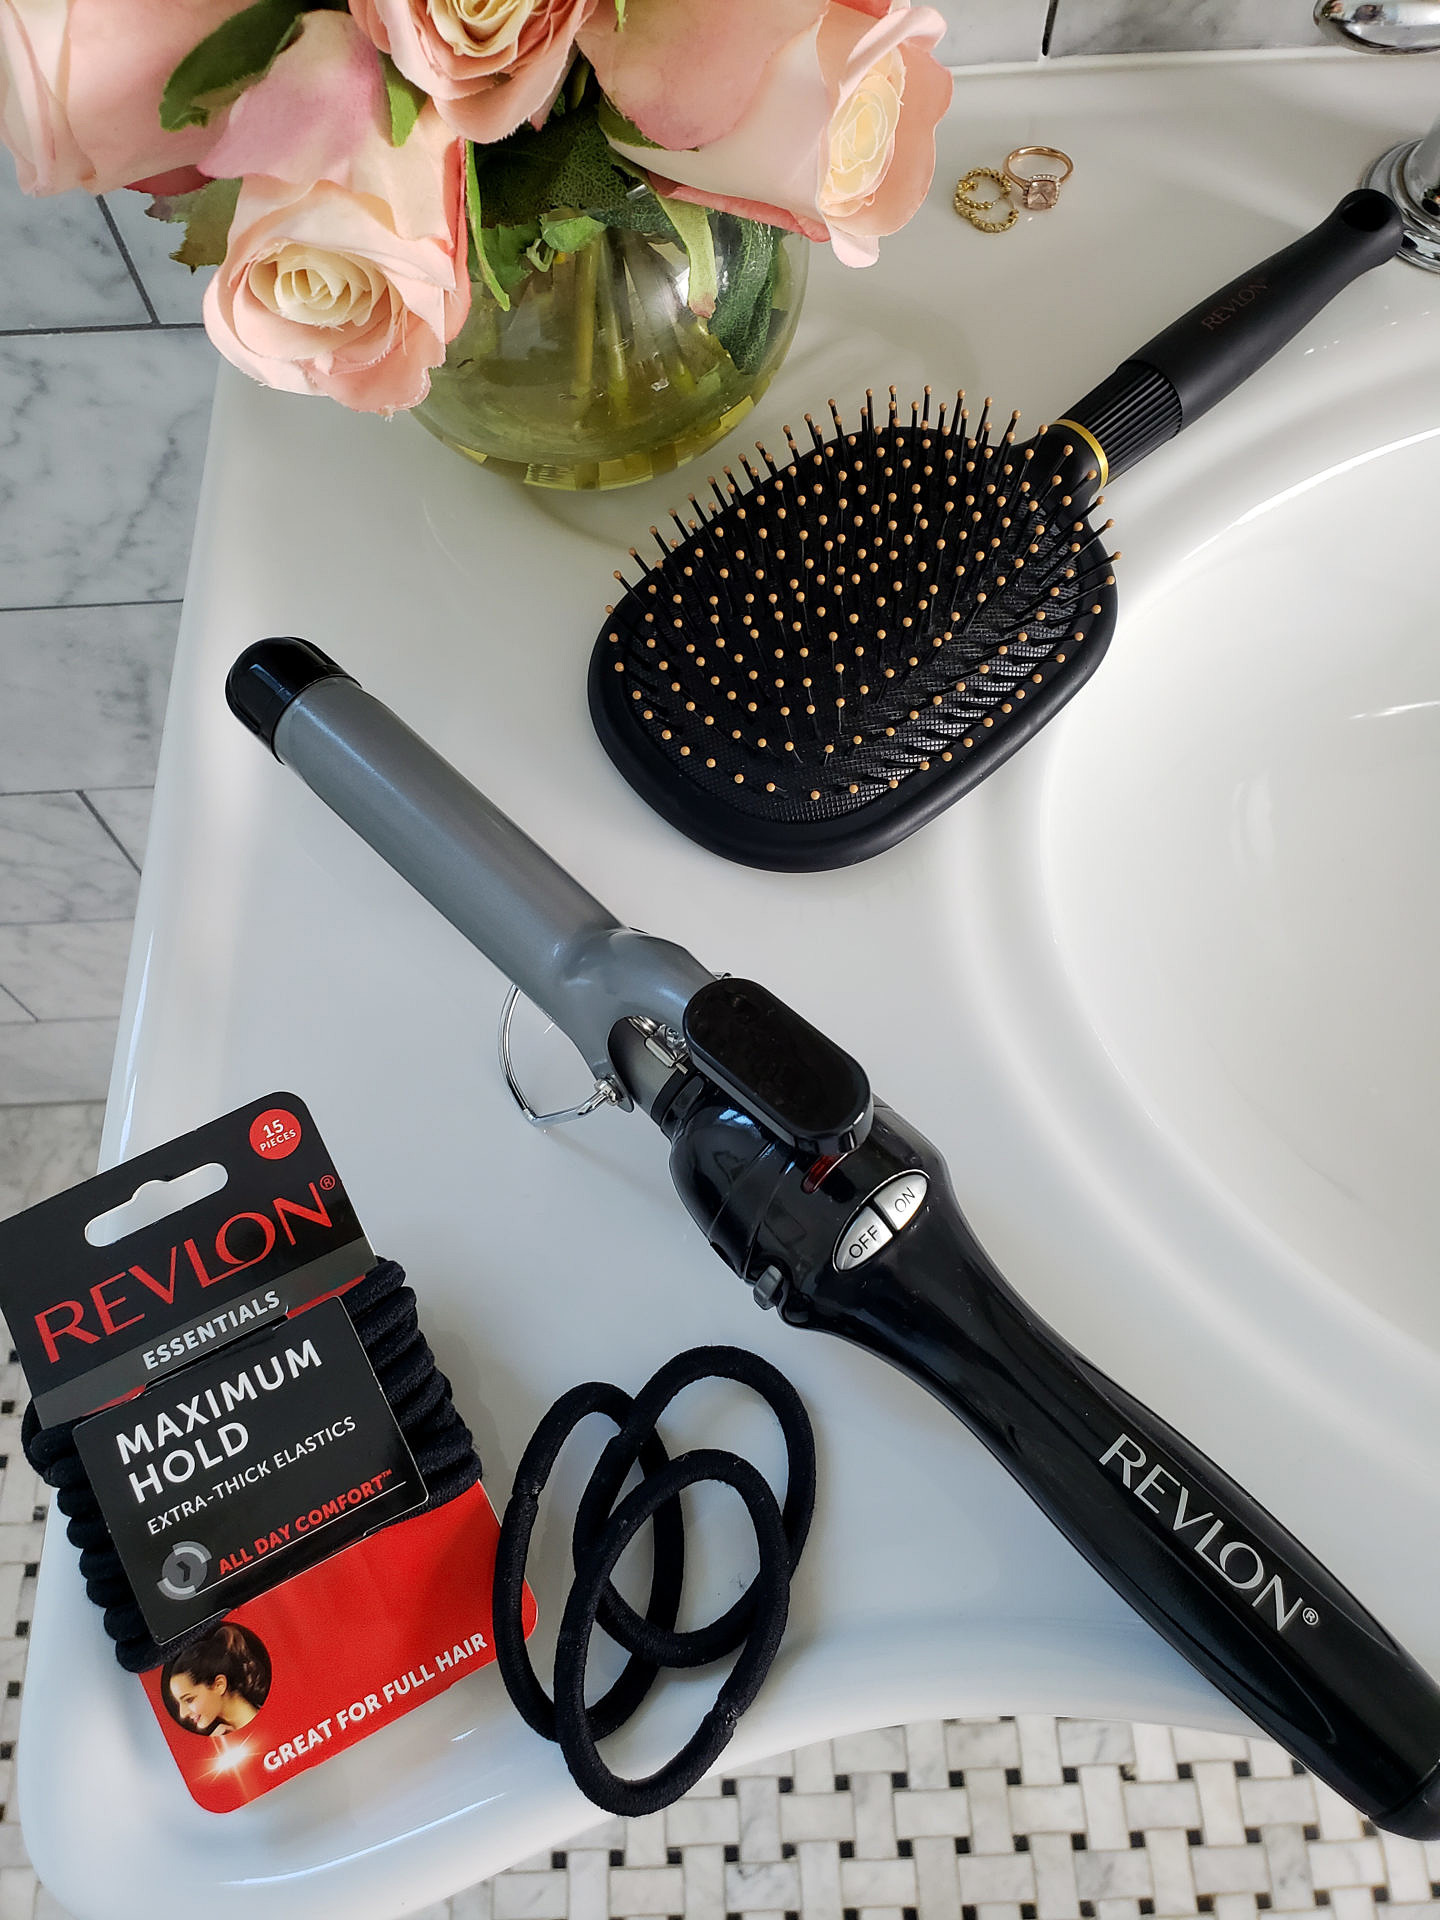 Bookmark this post ASAP if you are curious how to get the perfect curls at home. Orange County Blogger Debbie Savage is sharing her top tips to achieving those perfect curls in the luxury of your own home. 